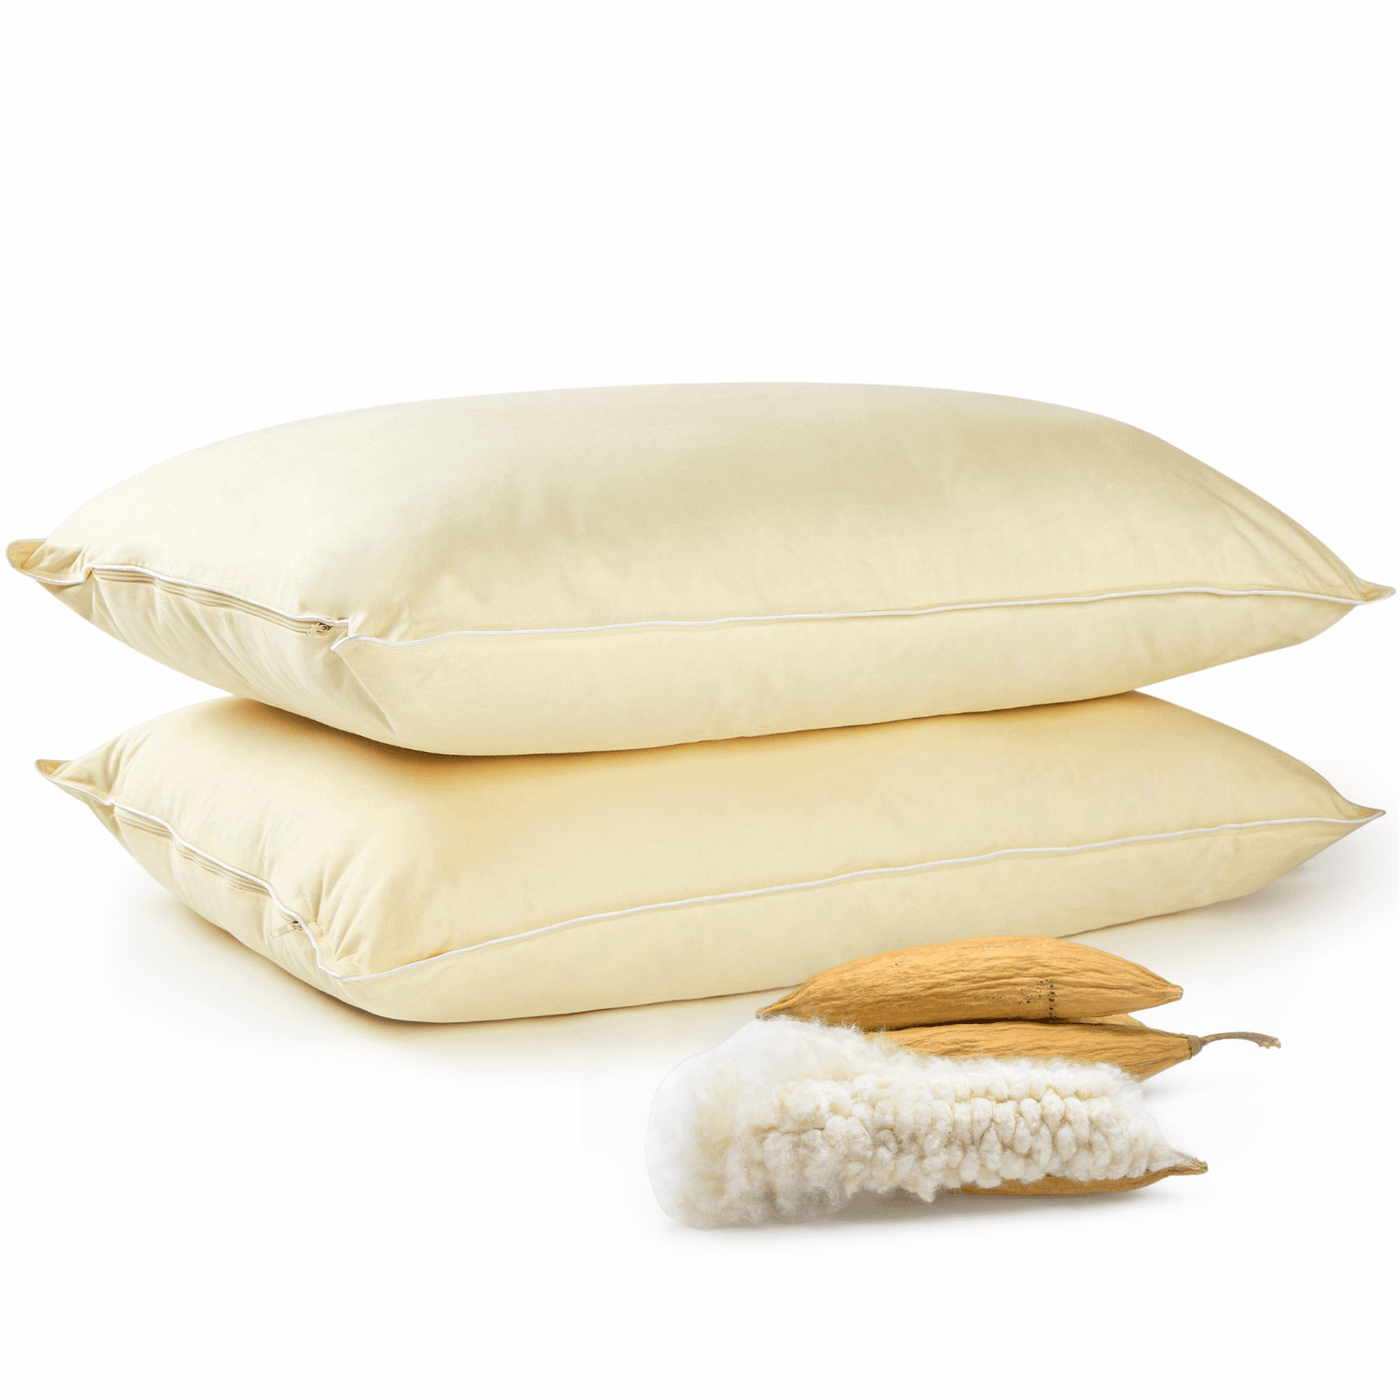 https://www.cheercollection.com/cdn/shop/products/cheer-collection-set-of-2-organic-kapok-bed-pillows-fiber-filled-sleeping-pillows-with-breathable-cotton-shell-567226_1400x.png?v=1672396644